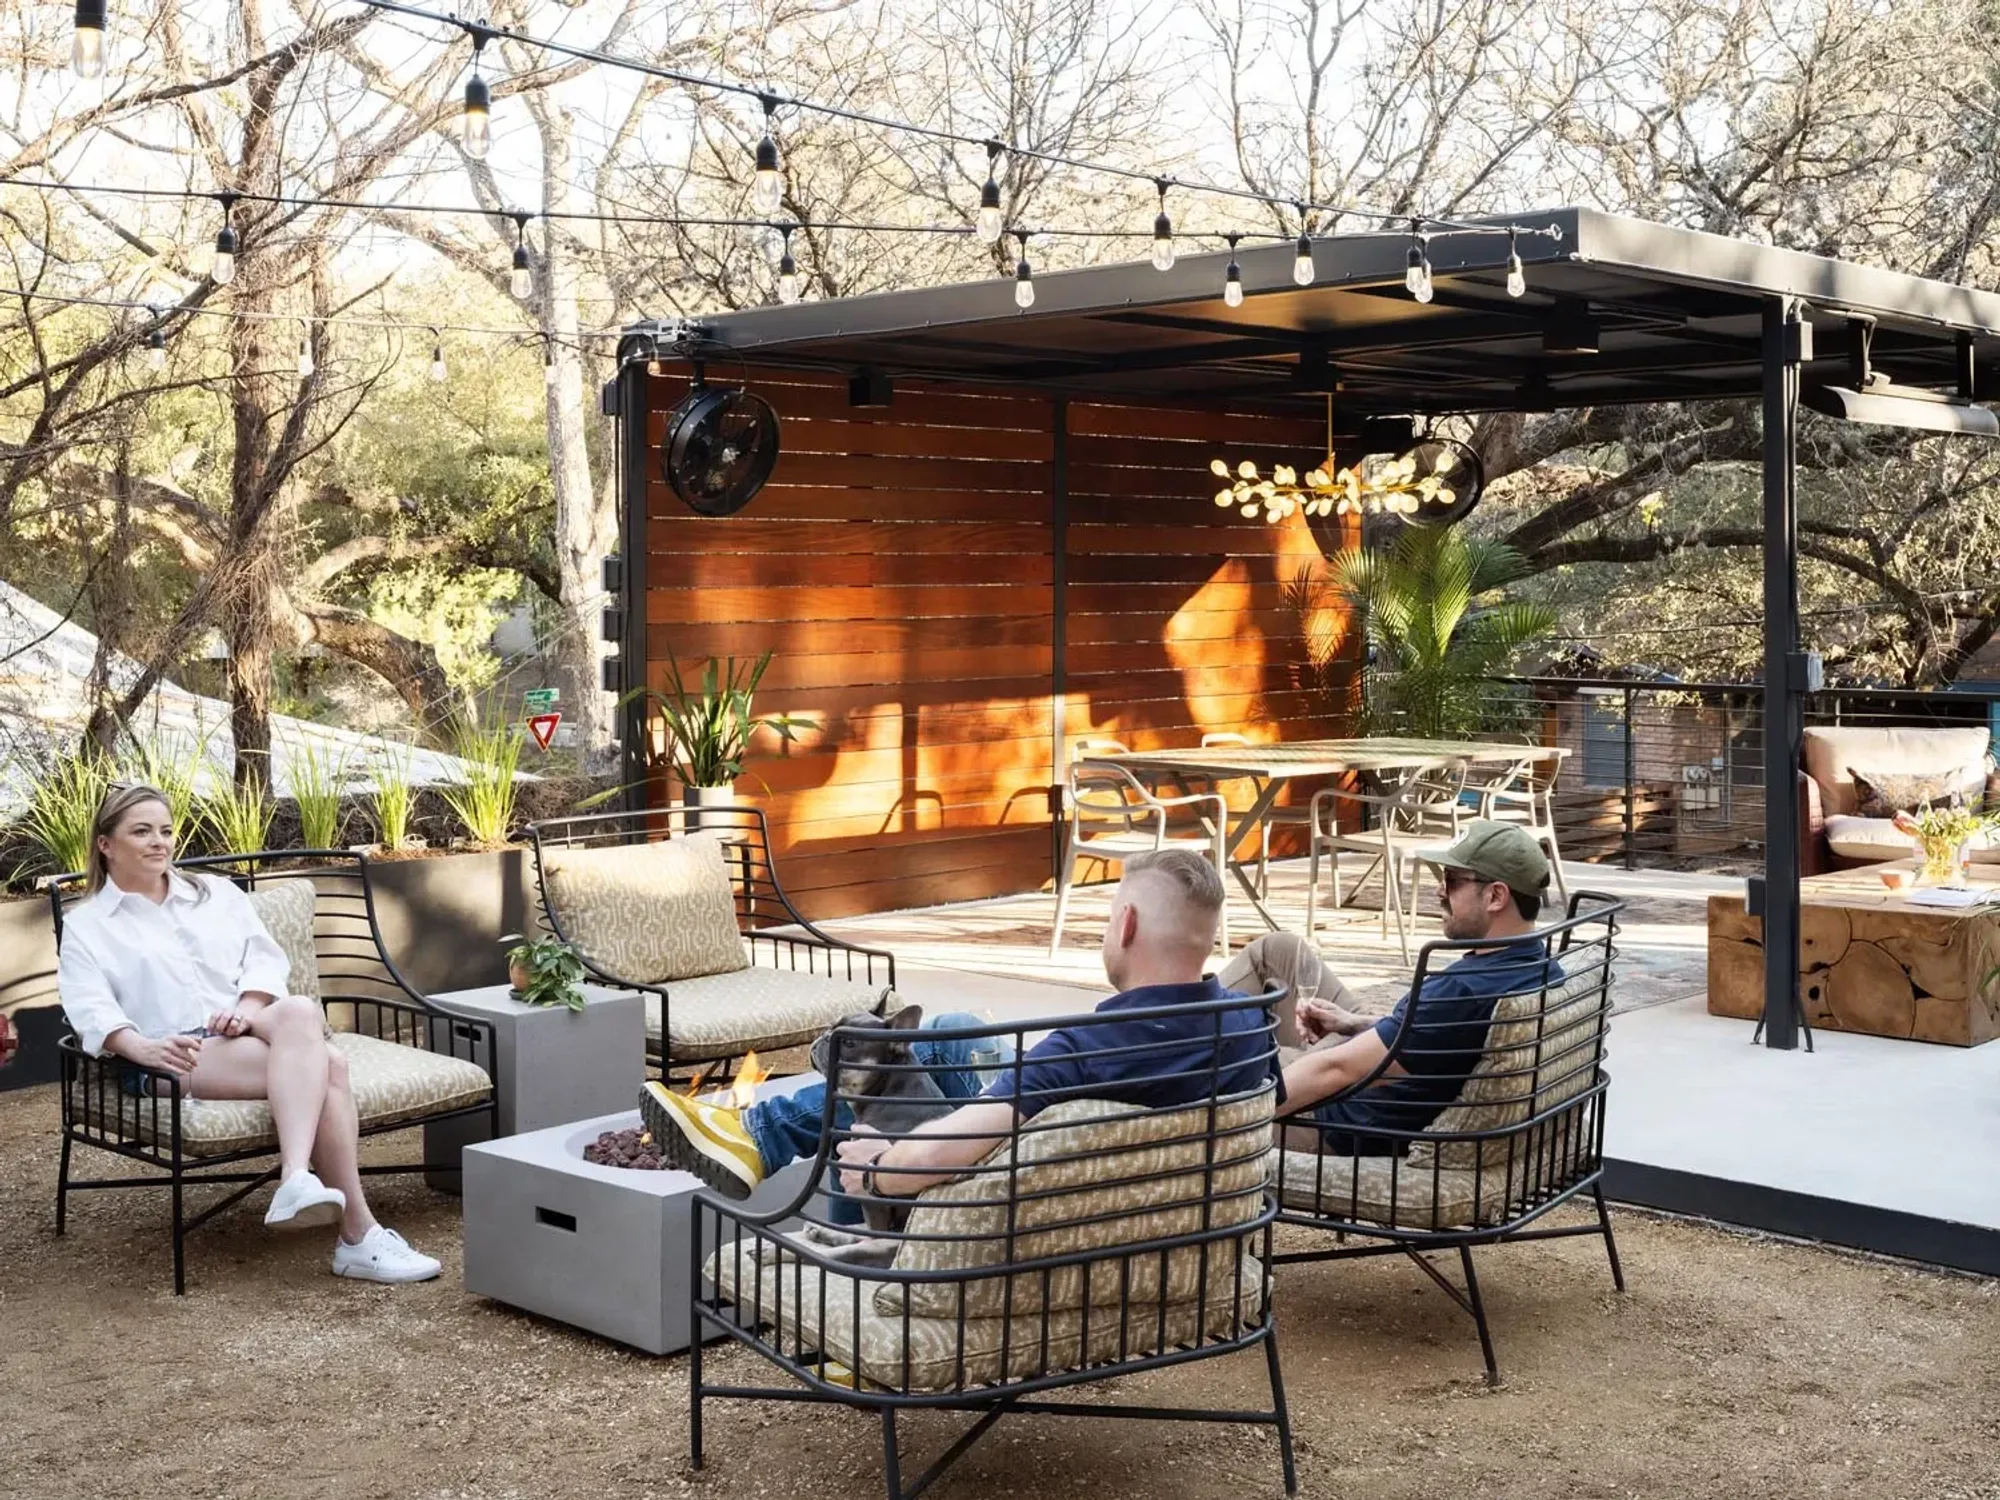 Backyard shade structure and fire pit